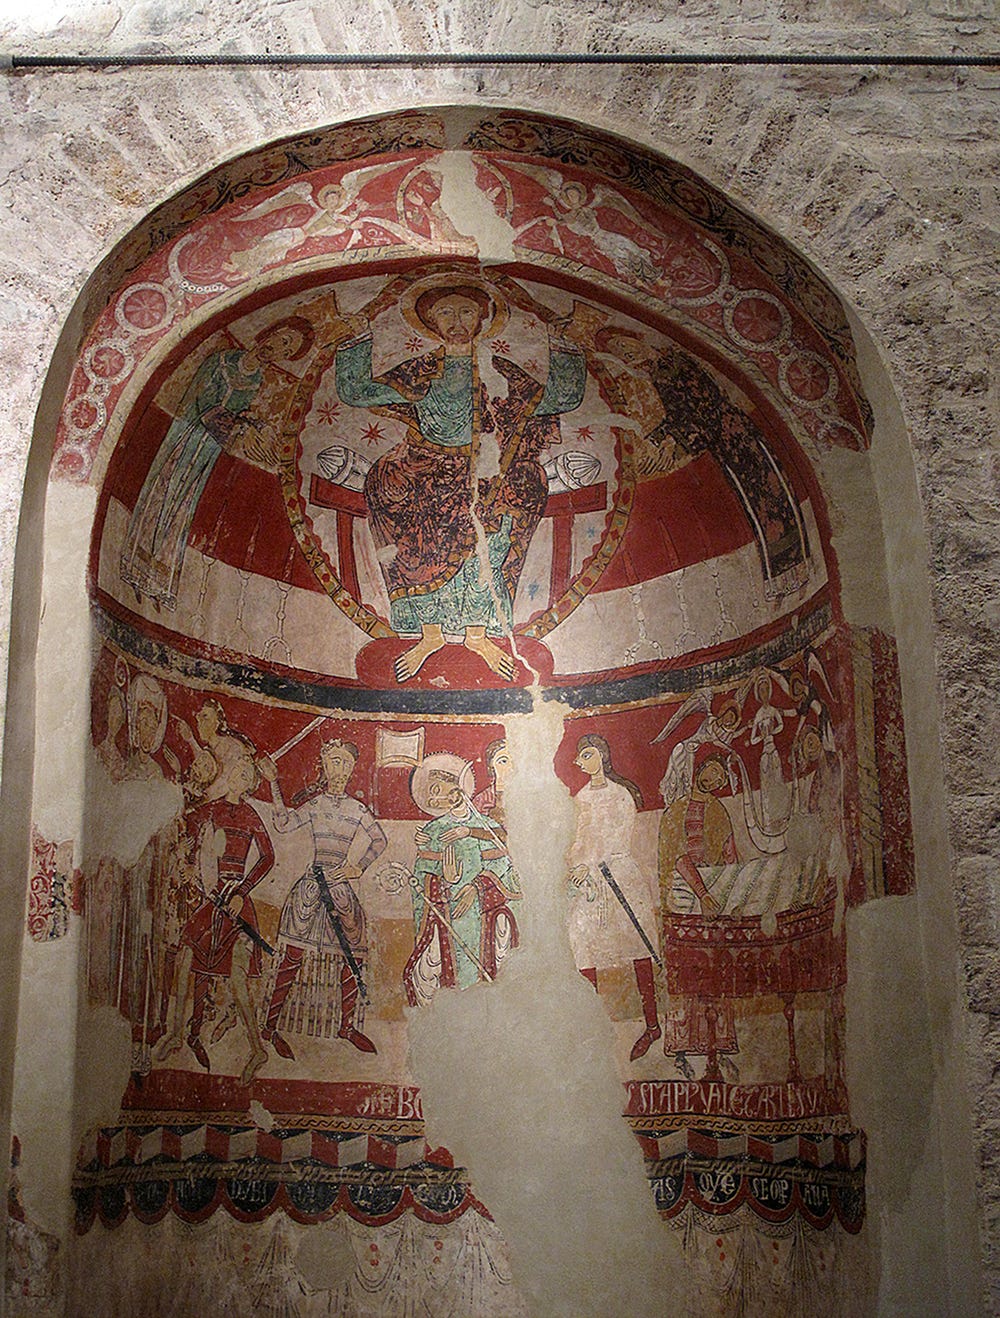 Concave wall painted with scenes of St Thomas Becket's consecration, death, and burial